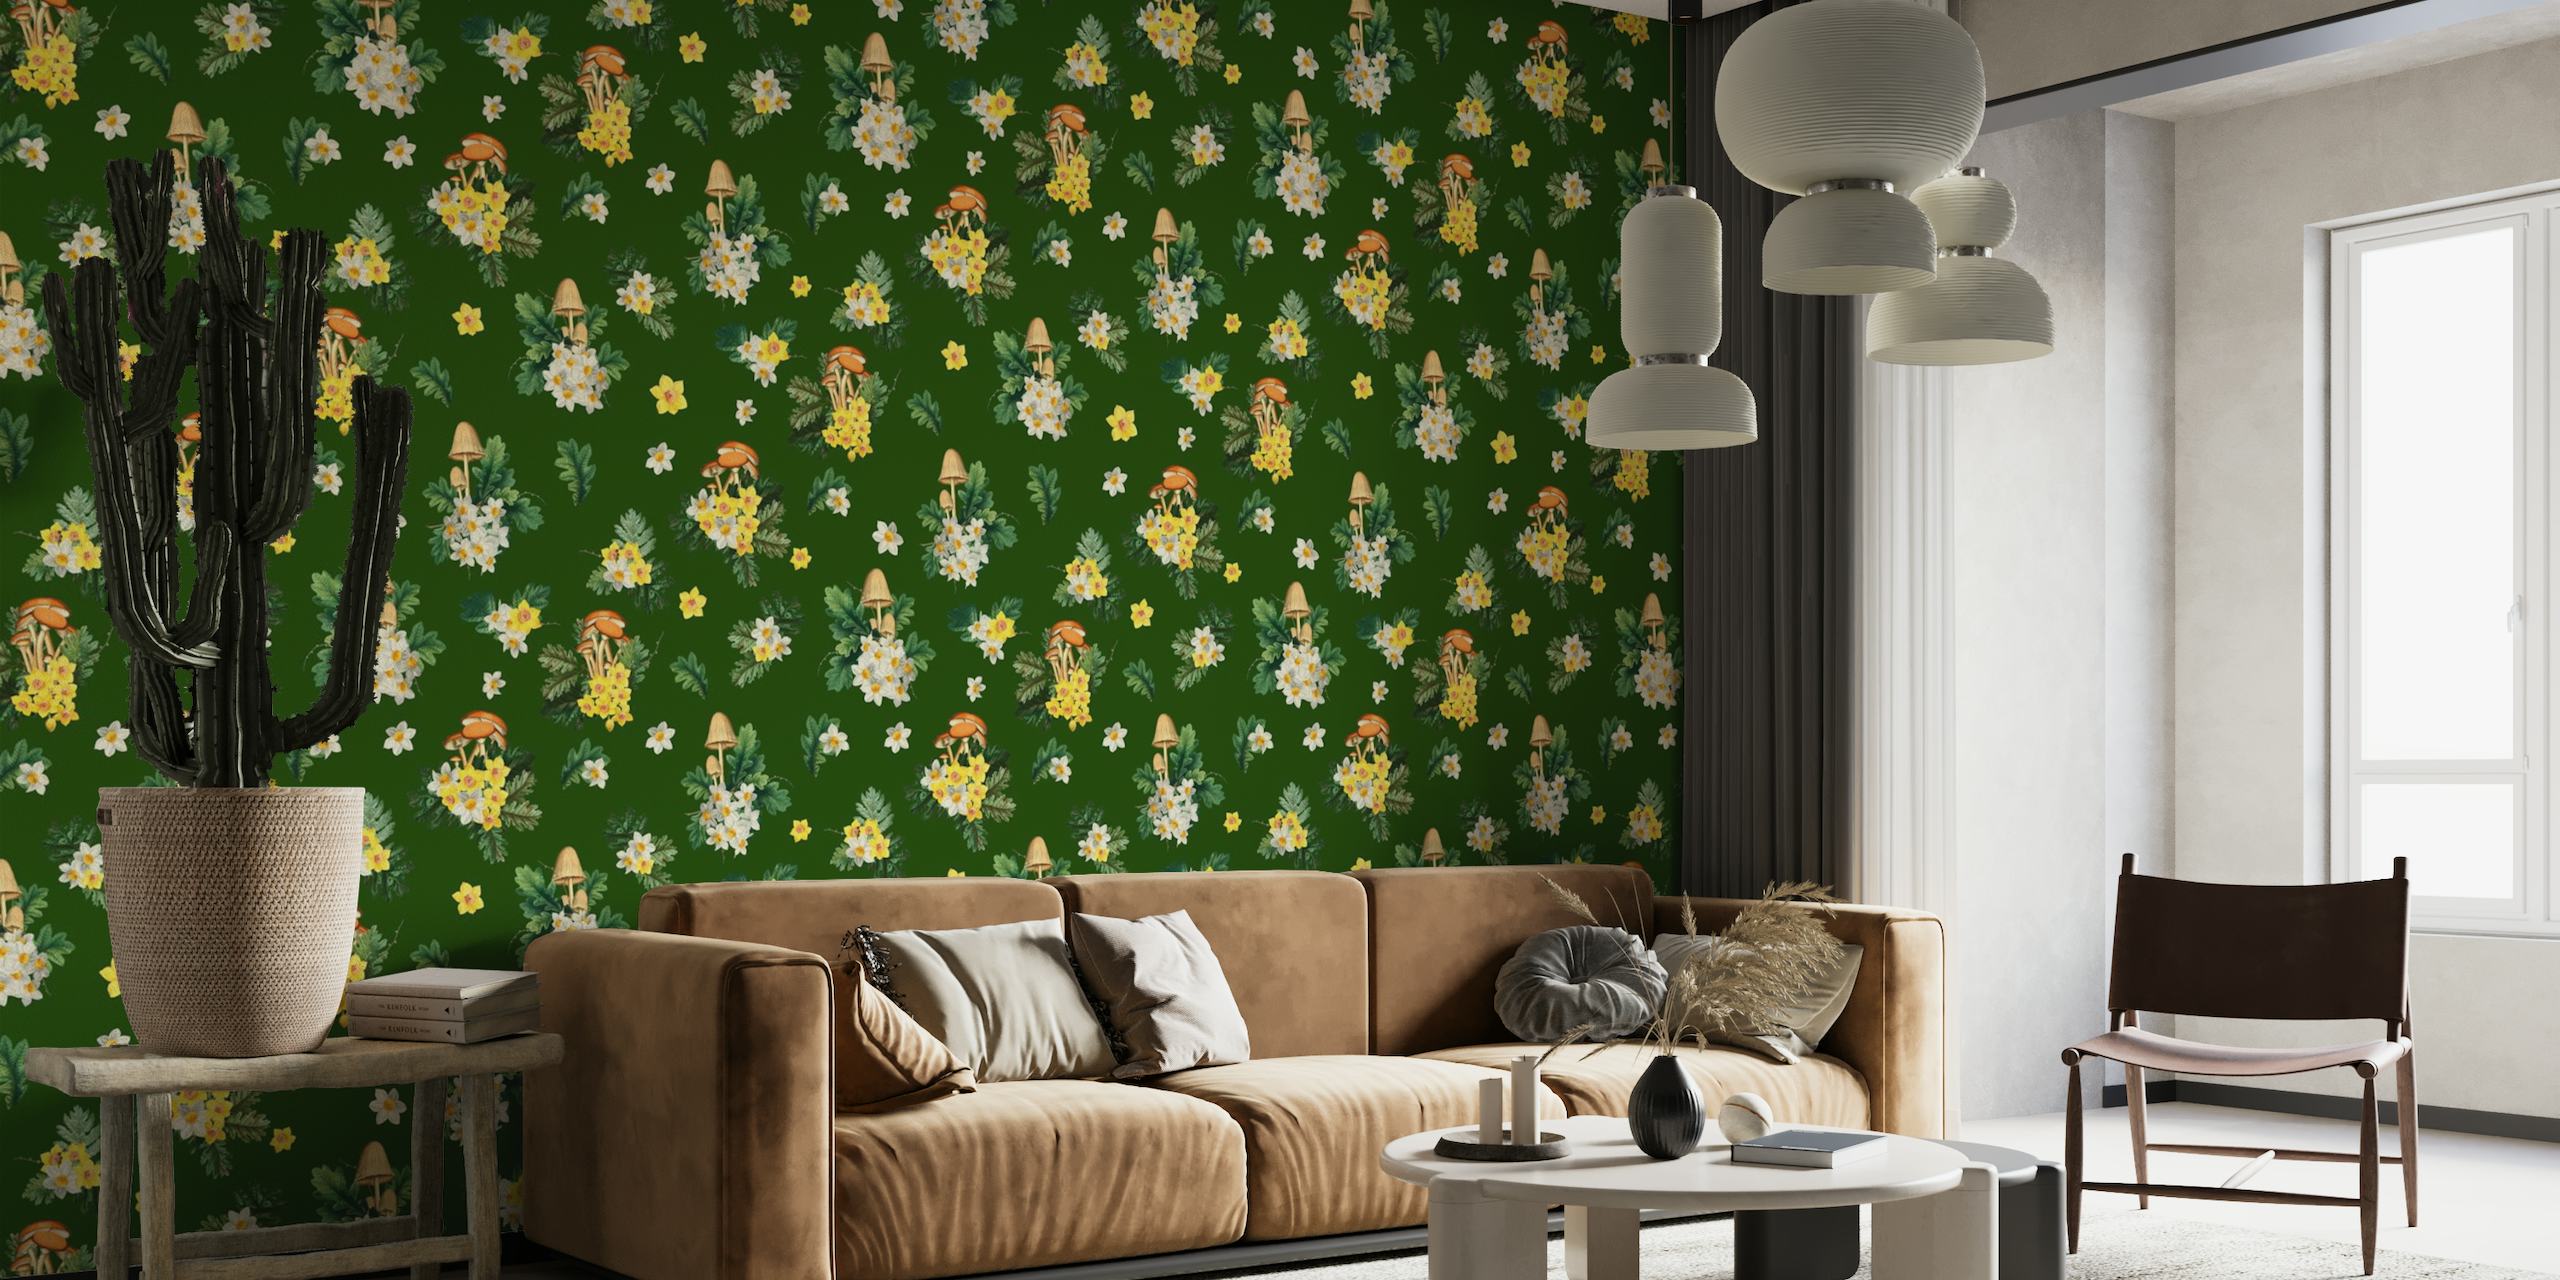 Illustrative wall mural of mushrooms and wildflowers on a green background, perfect for a nature-themed room.